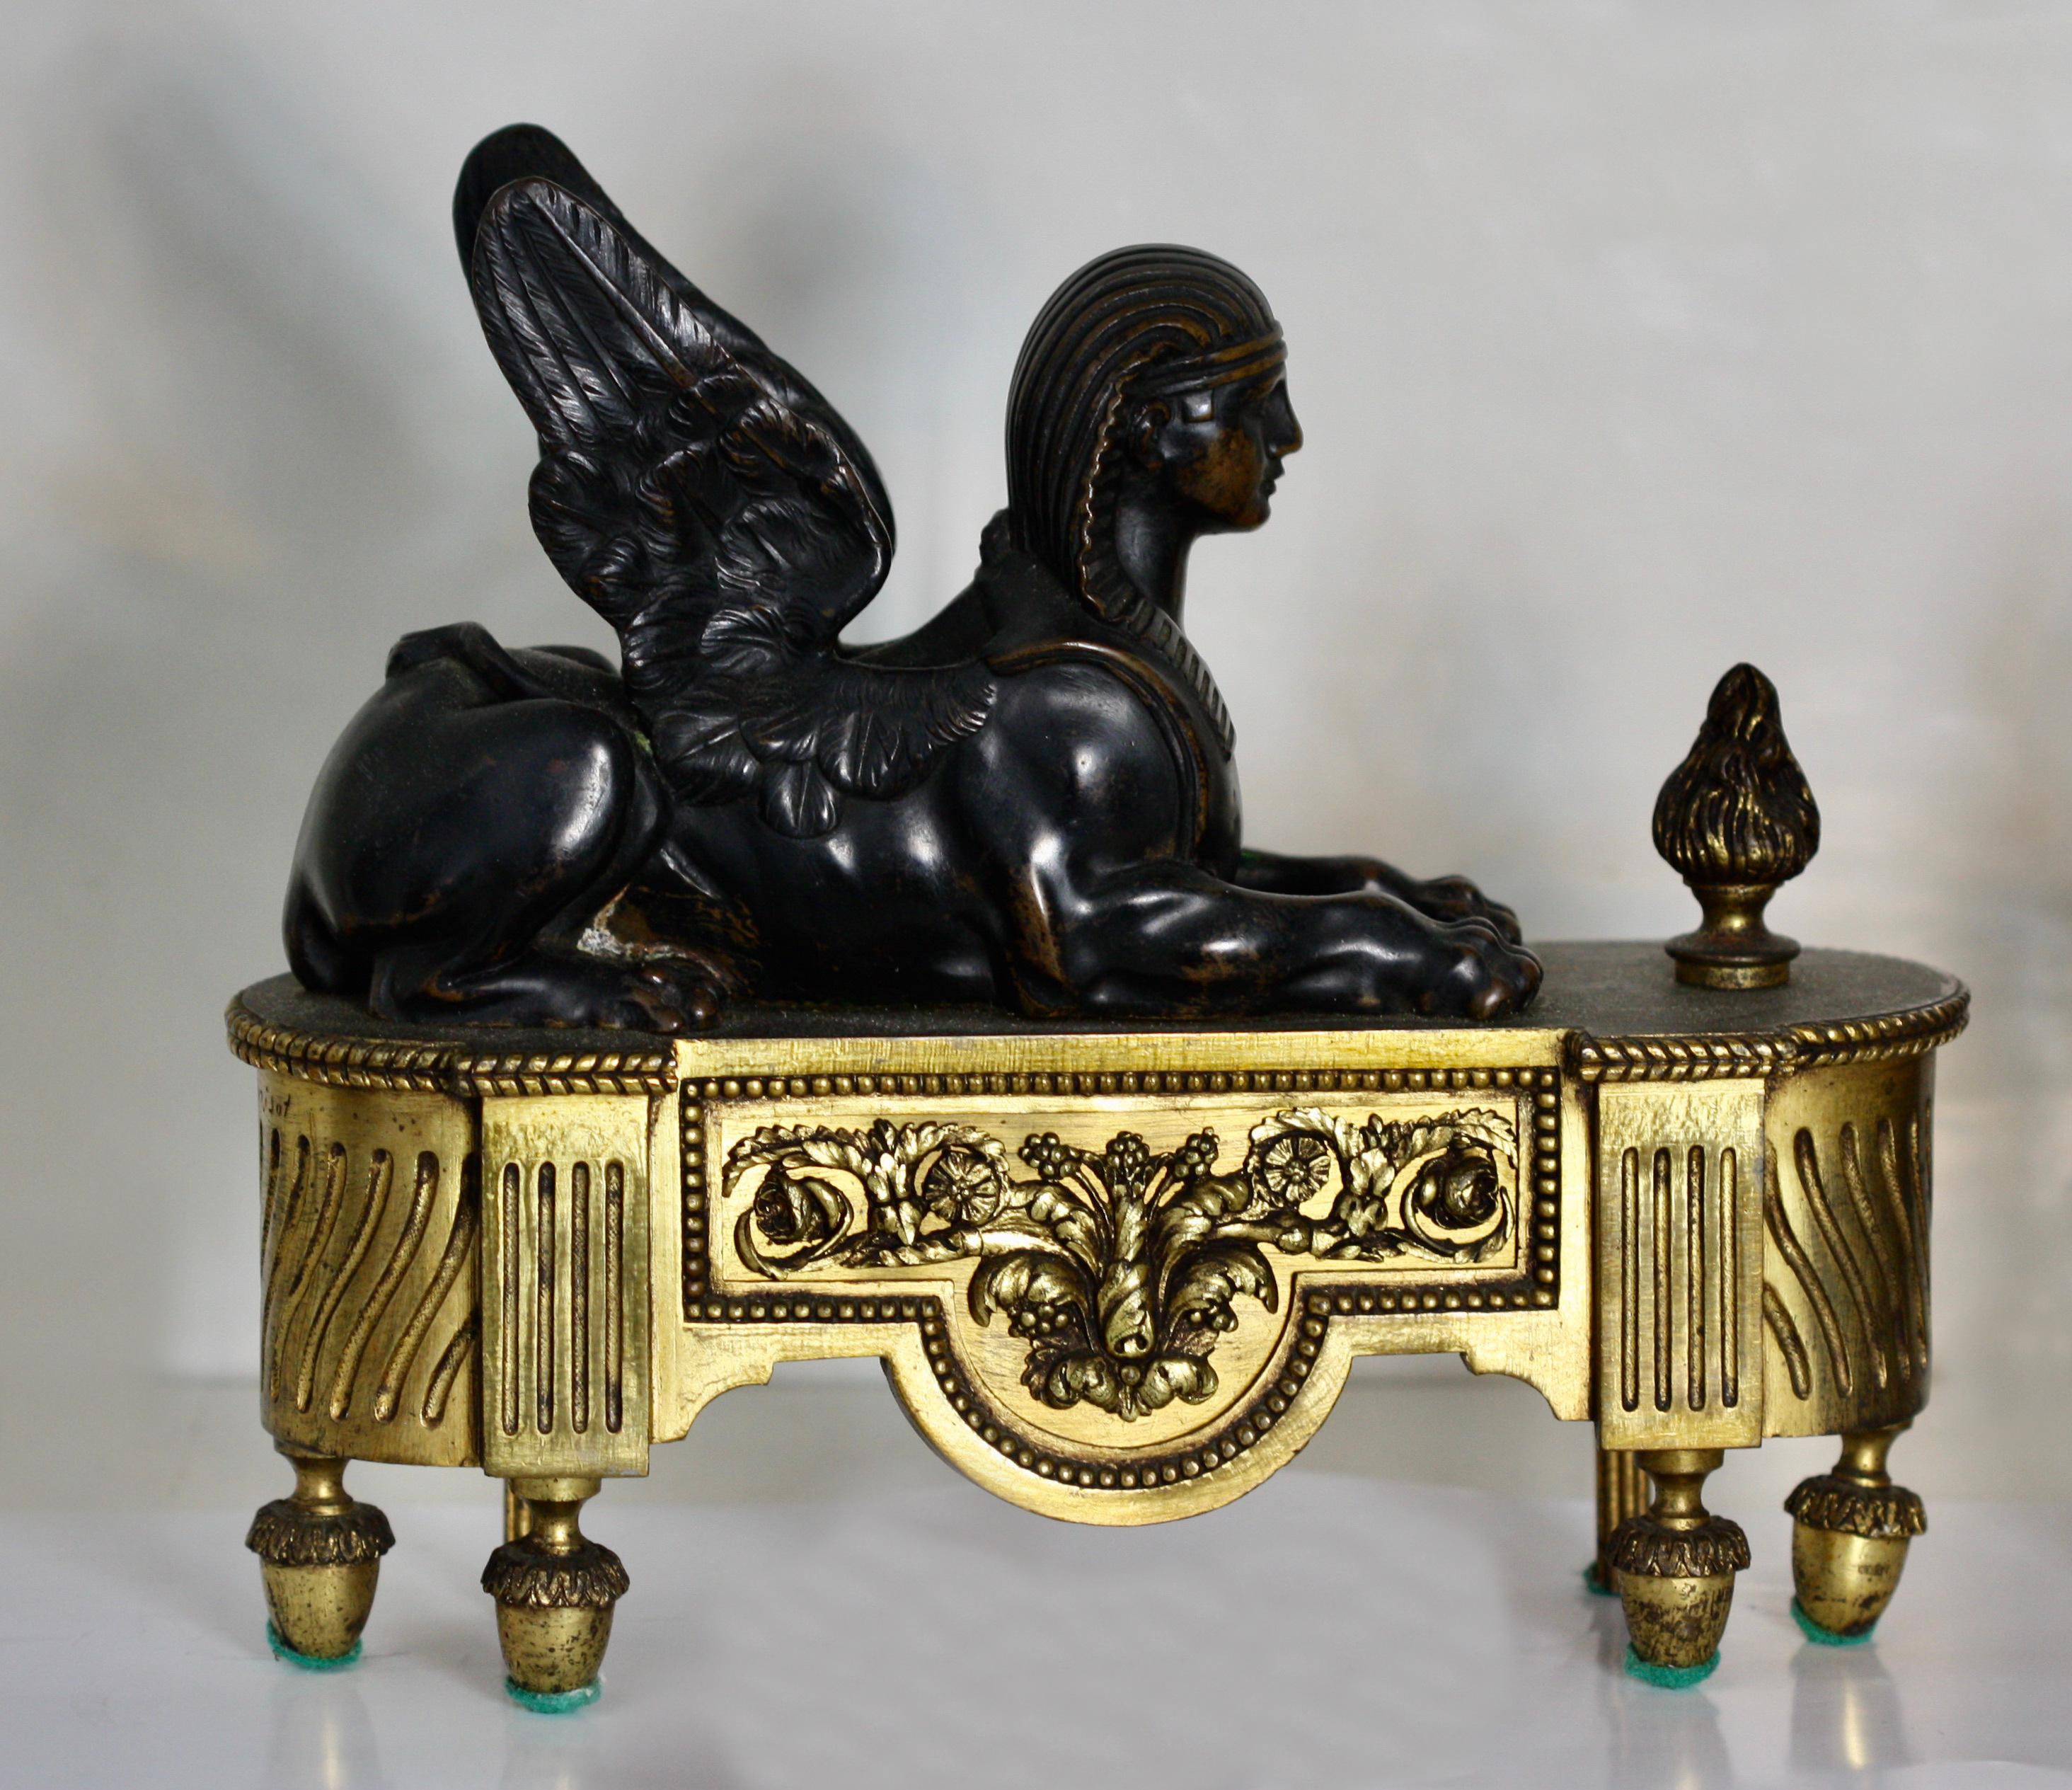 A pair of Empire gilt and patinated bronze chenets,
French, 18th century
each with a winged sphinx raised on a rectangular base with curved ends on acorn feet.
Measures: Height 10.25 in. (26.03 cm.), width 11.5 in. (29.21 cm.), depth 3.5 in.